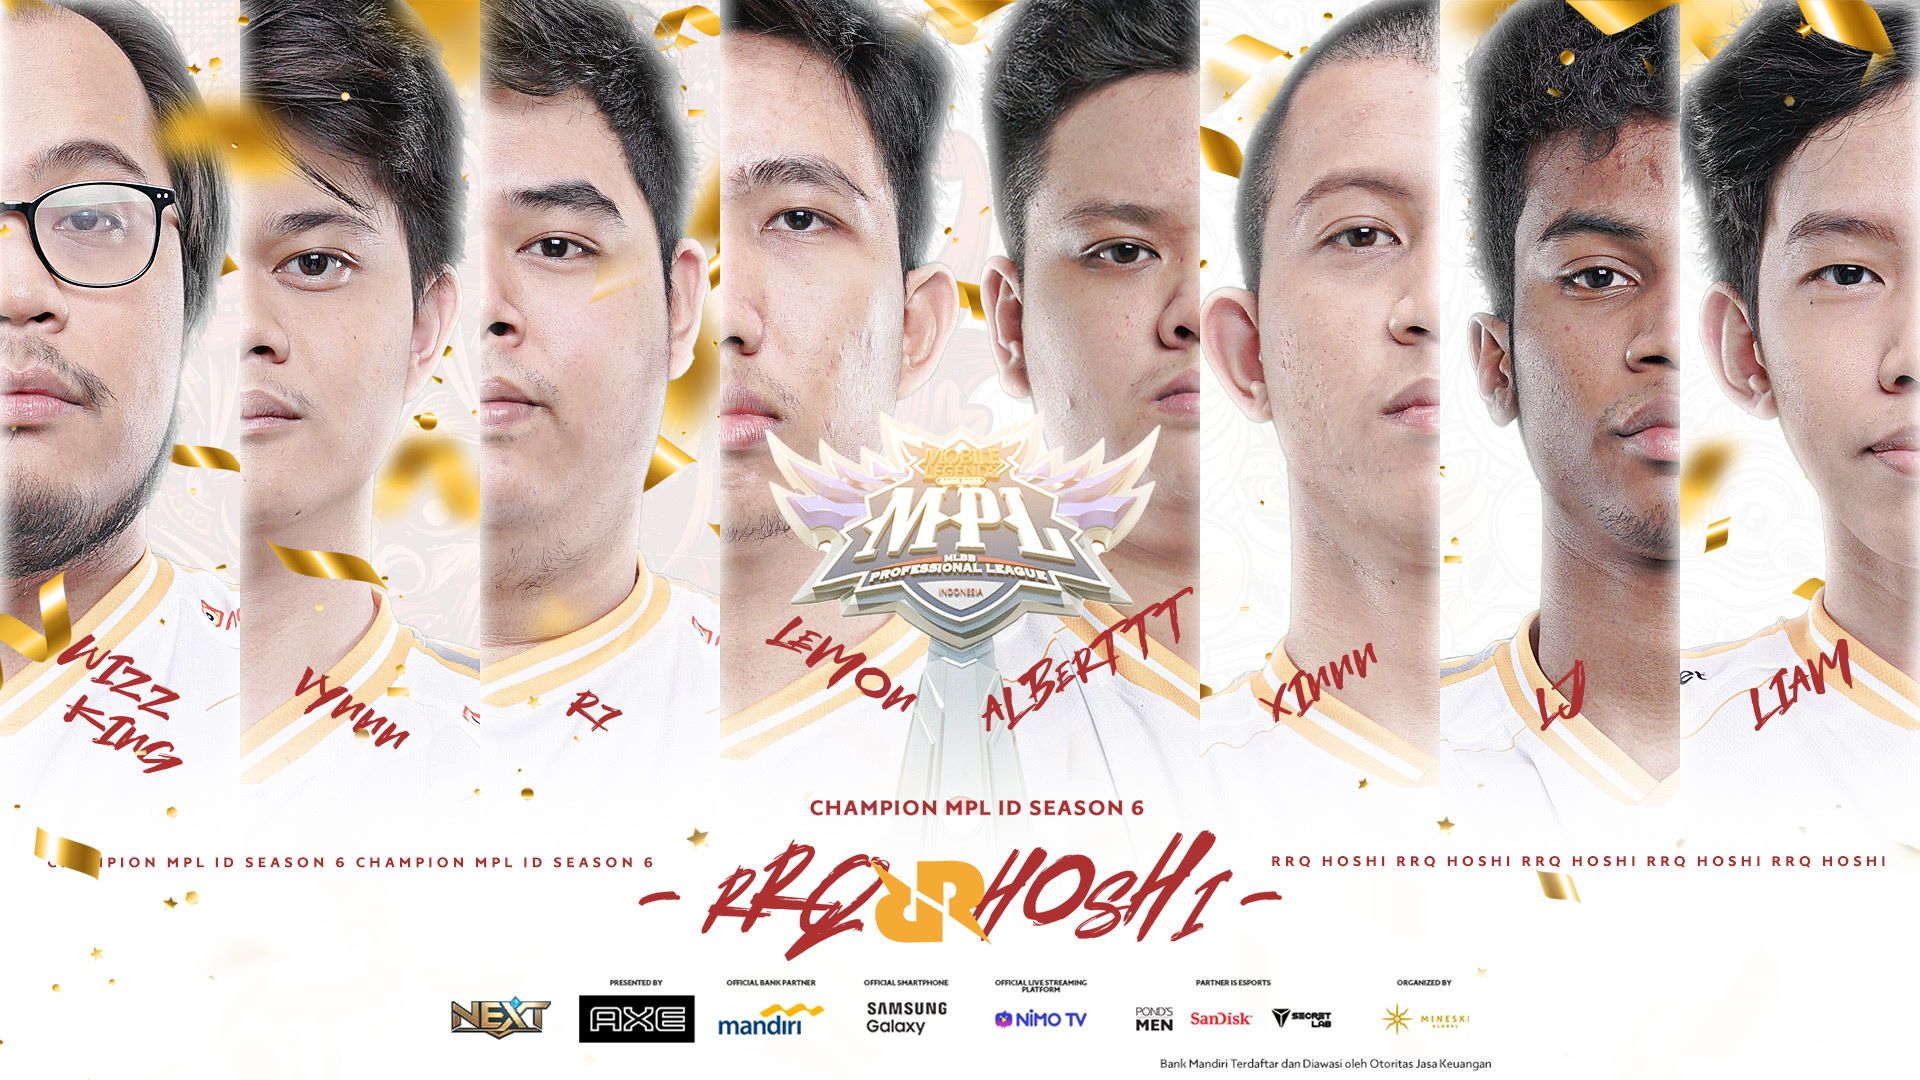 ICYMI: RRQ Hoshi Are Back To Back MPL Champions, Worlds Final Four, And More